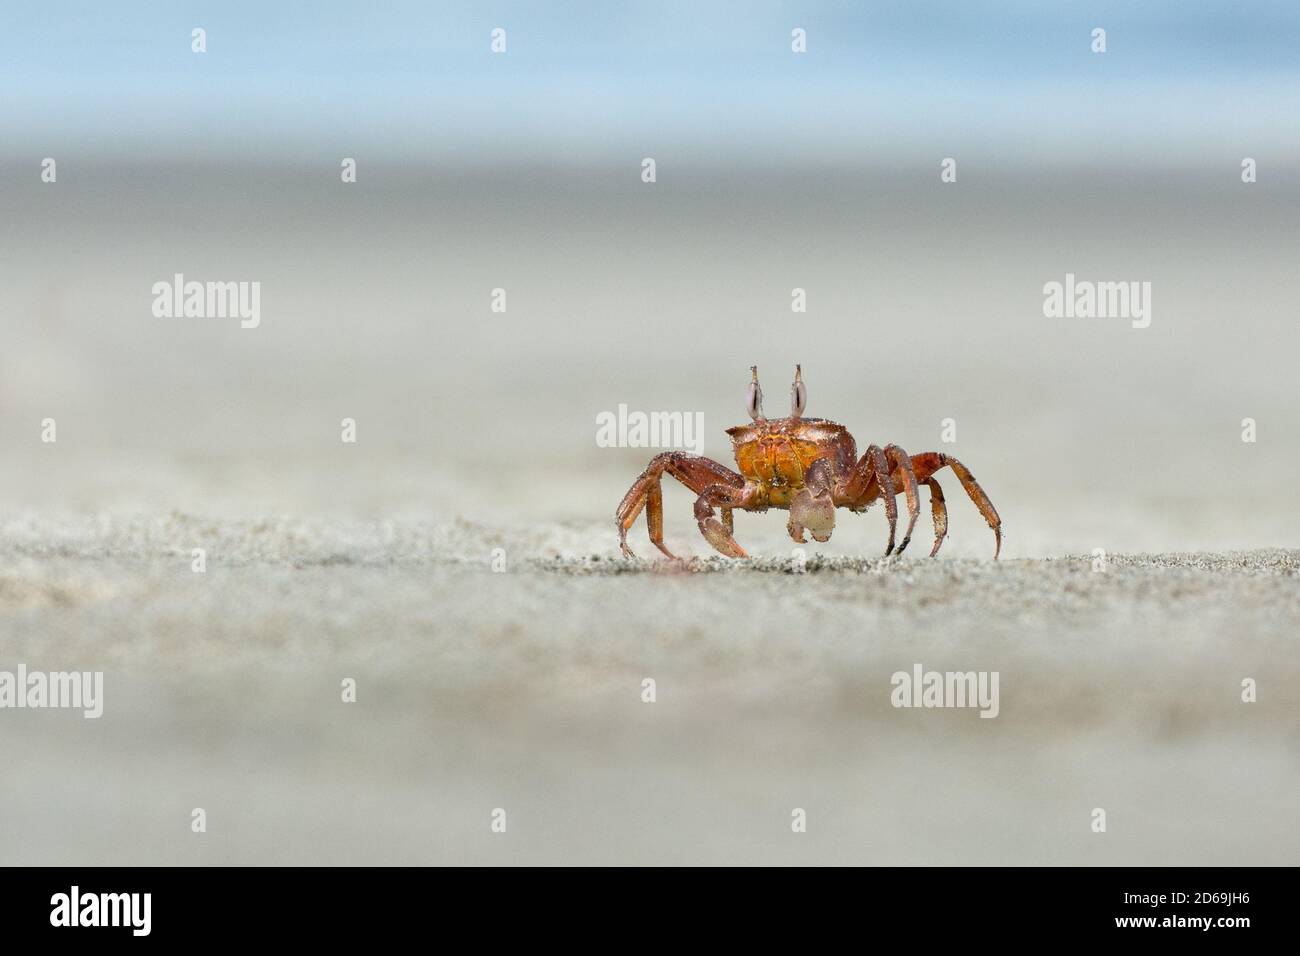 Painted Ghost Crab (Ocypode gaudichaudii), found on the beaches of northern Peru, digs holes in the beach and retreats into these as threats approach. Stock Photo